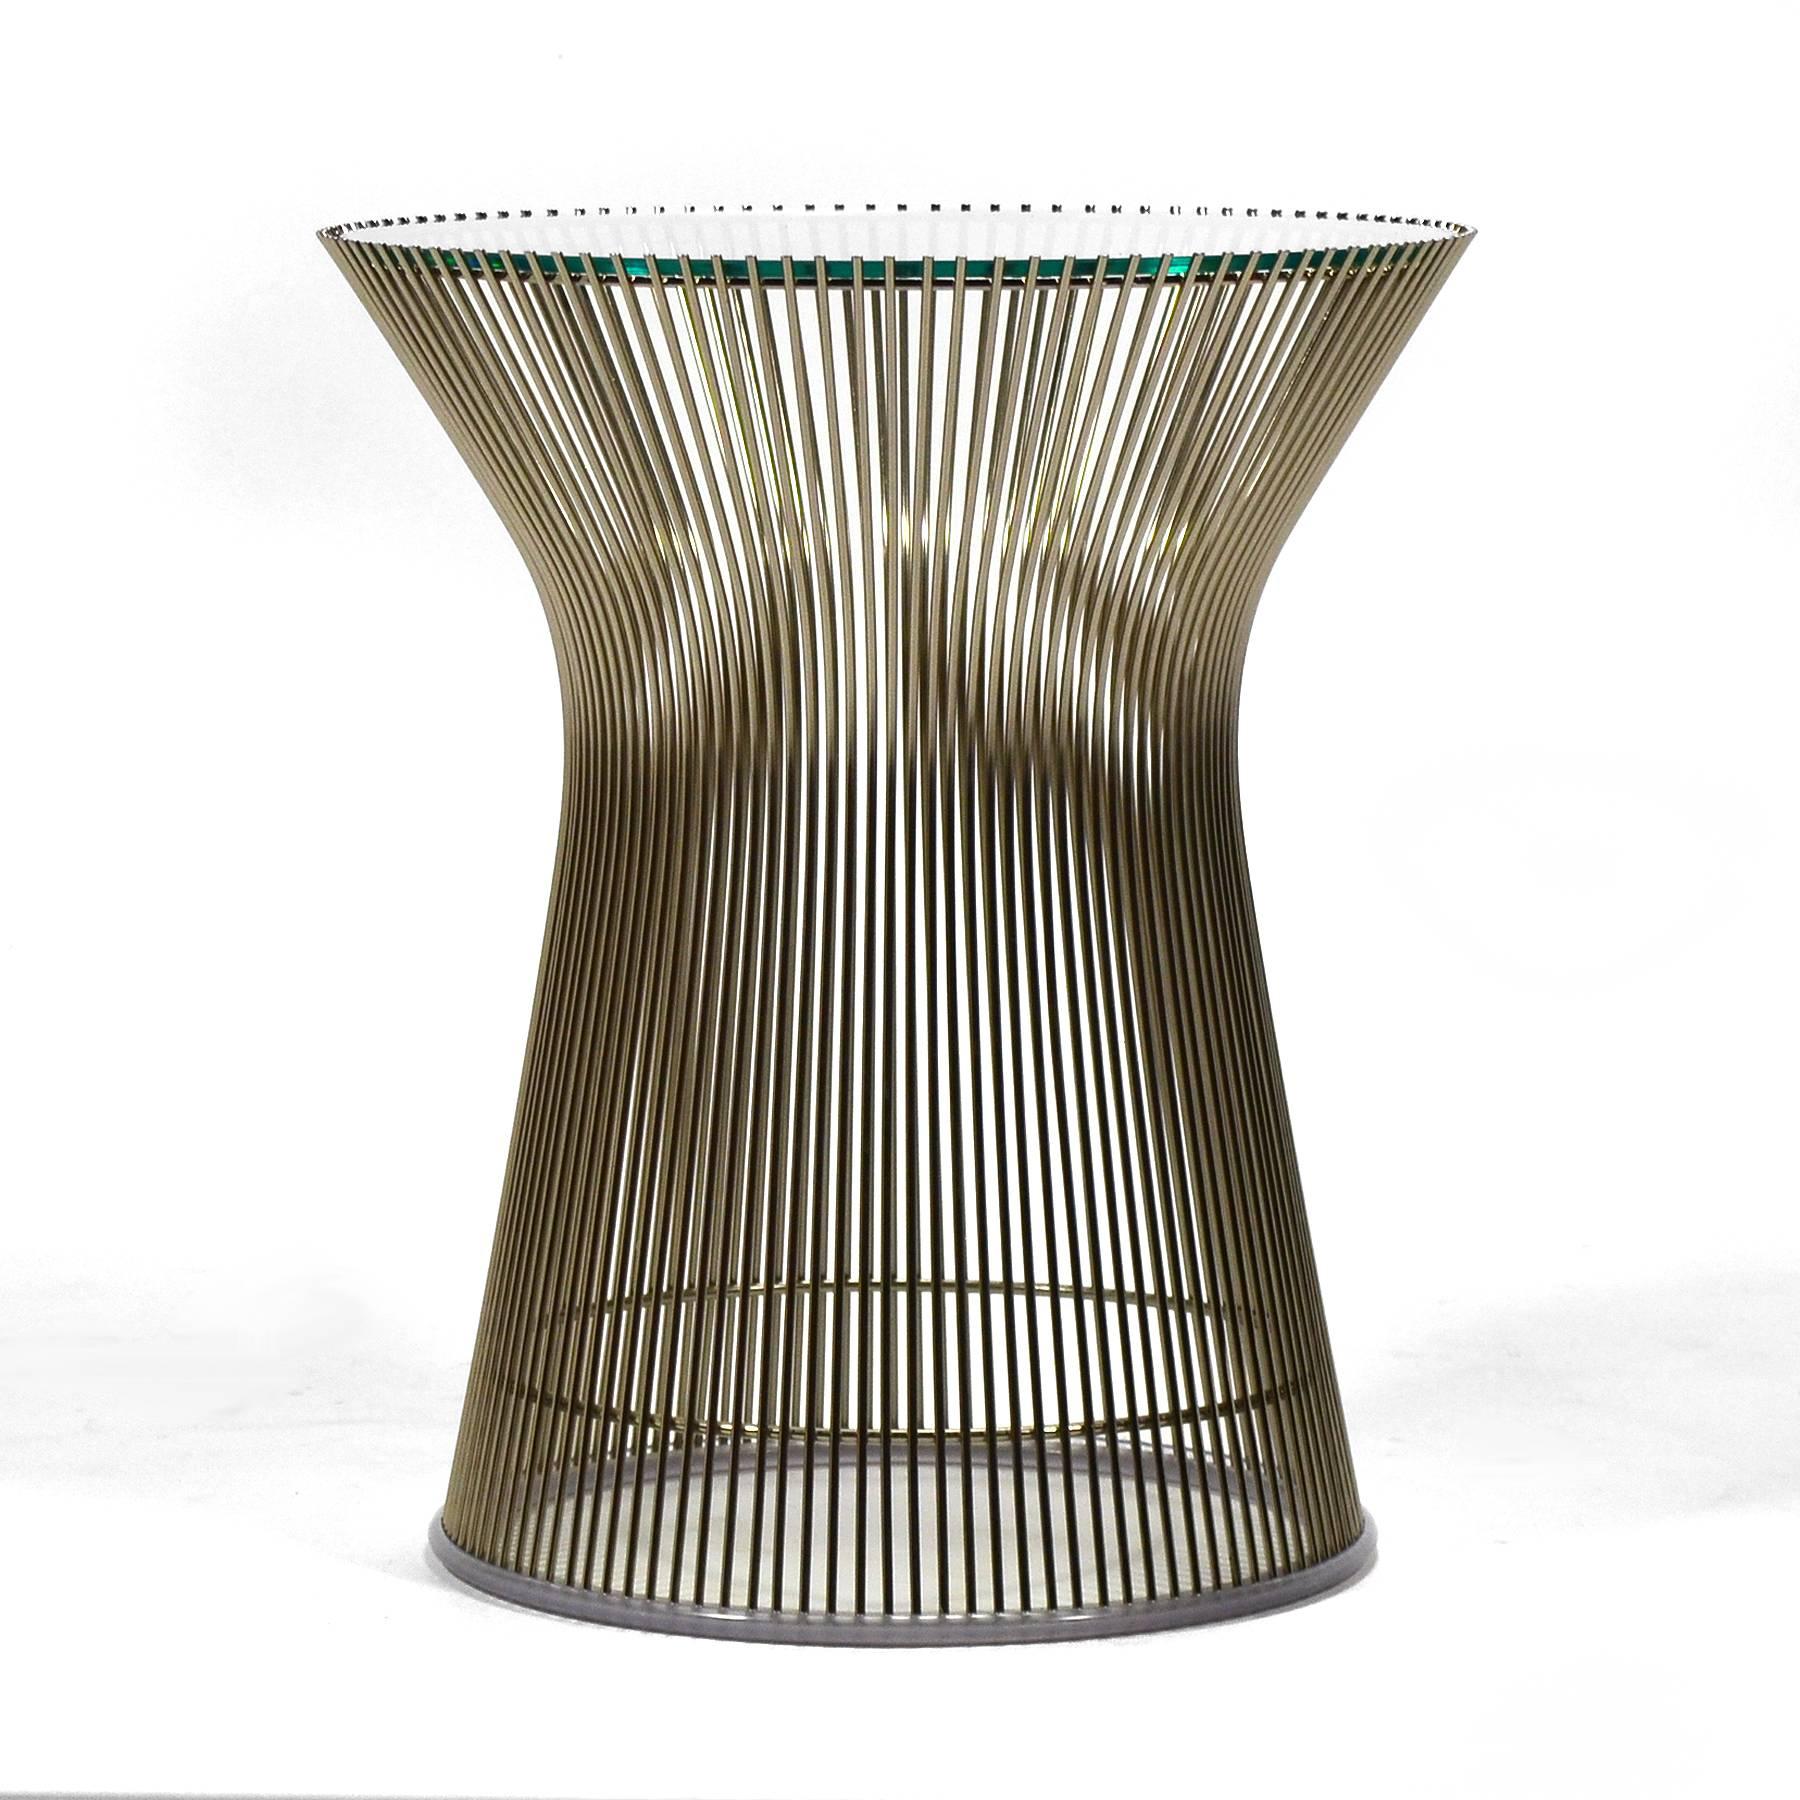 The smallest from the collection of tables Warren Platner designed for Knoll in 1966, this side table nonetheless has great visual presence. The wire rods of the base capture space, create shifting moire' patterns, and support the glass top.